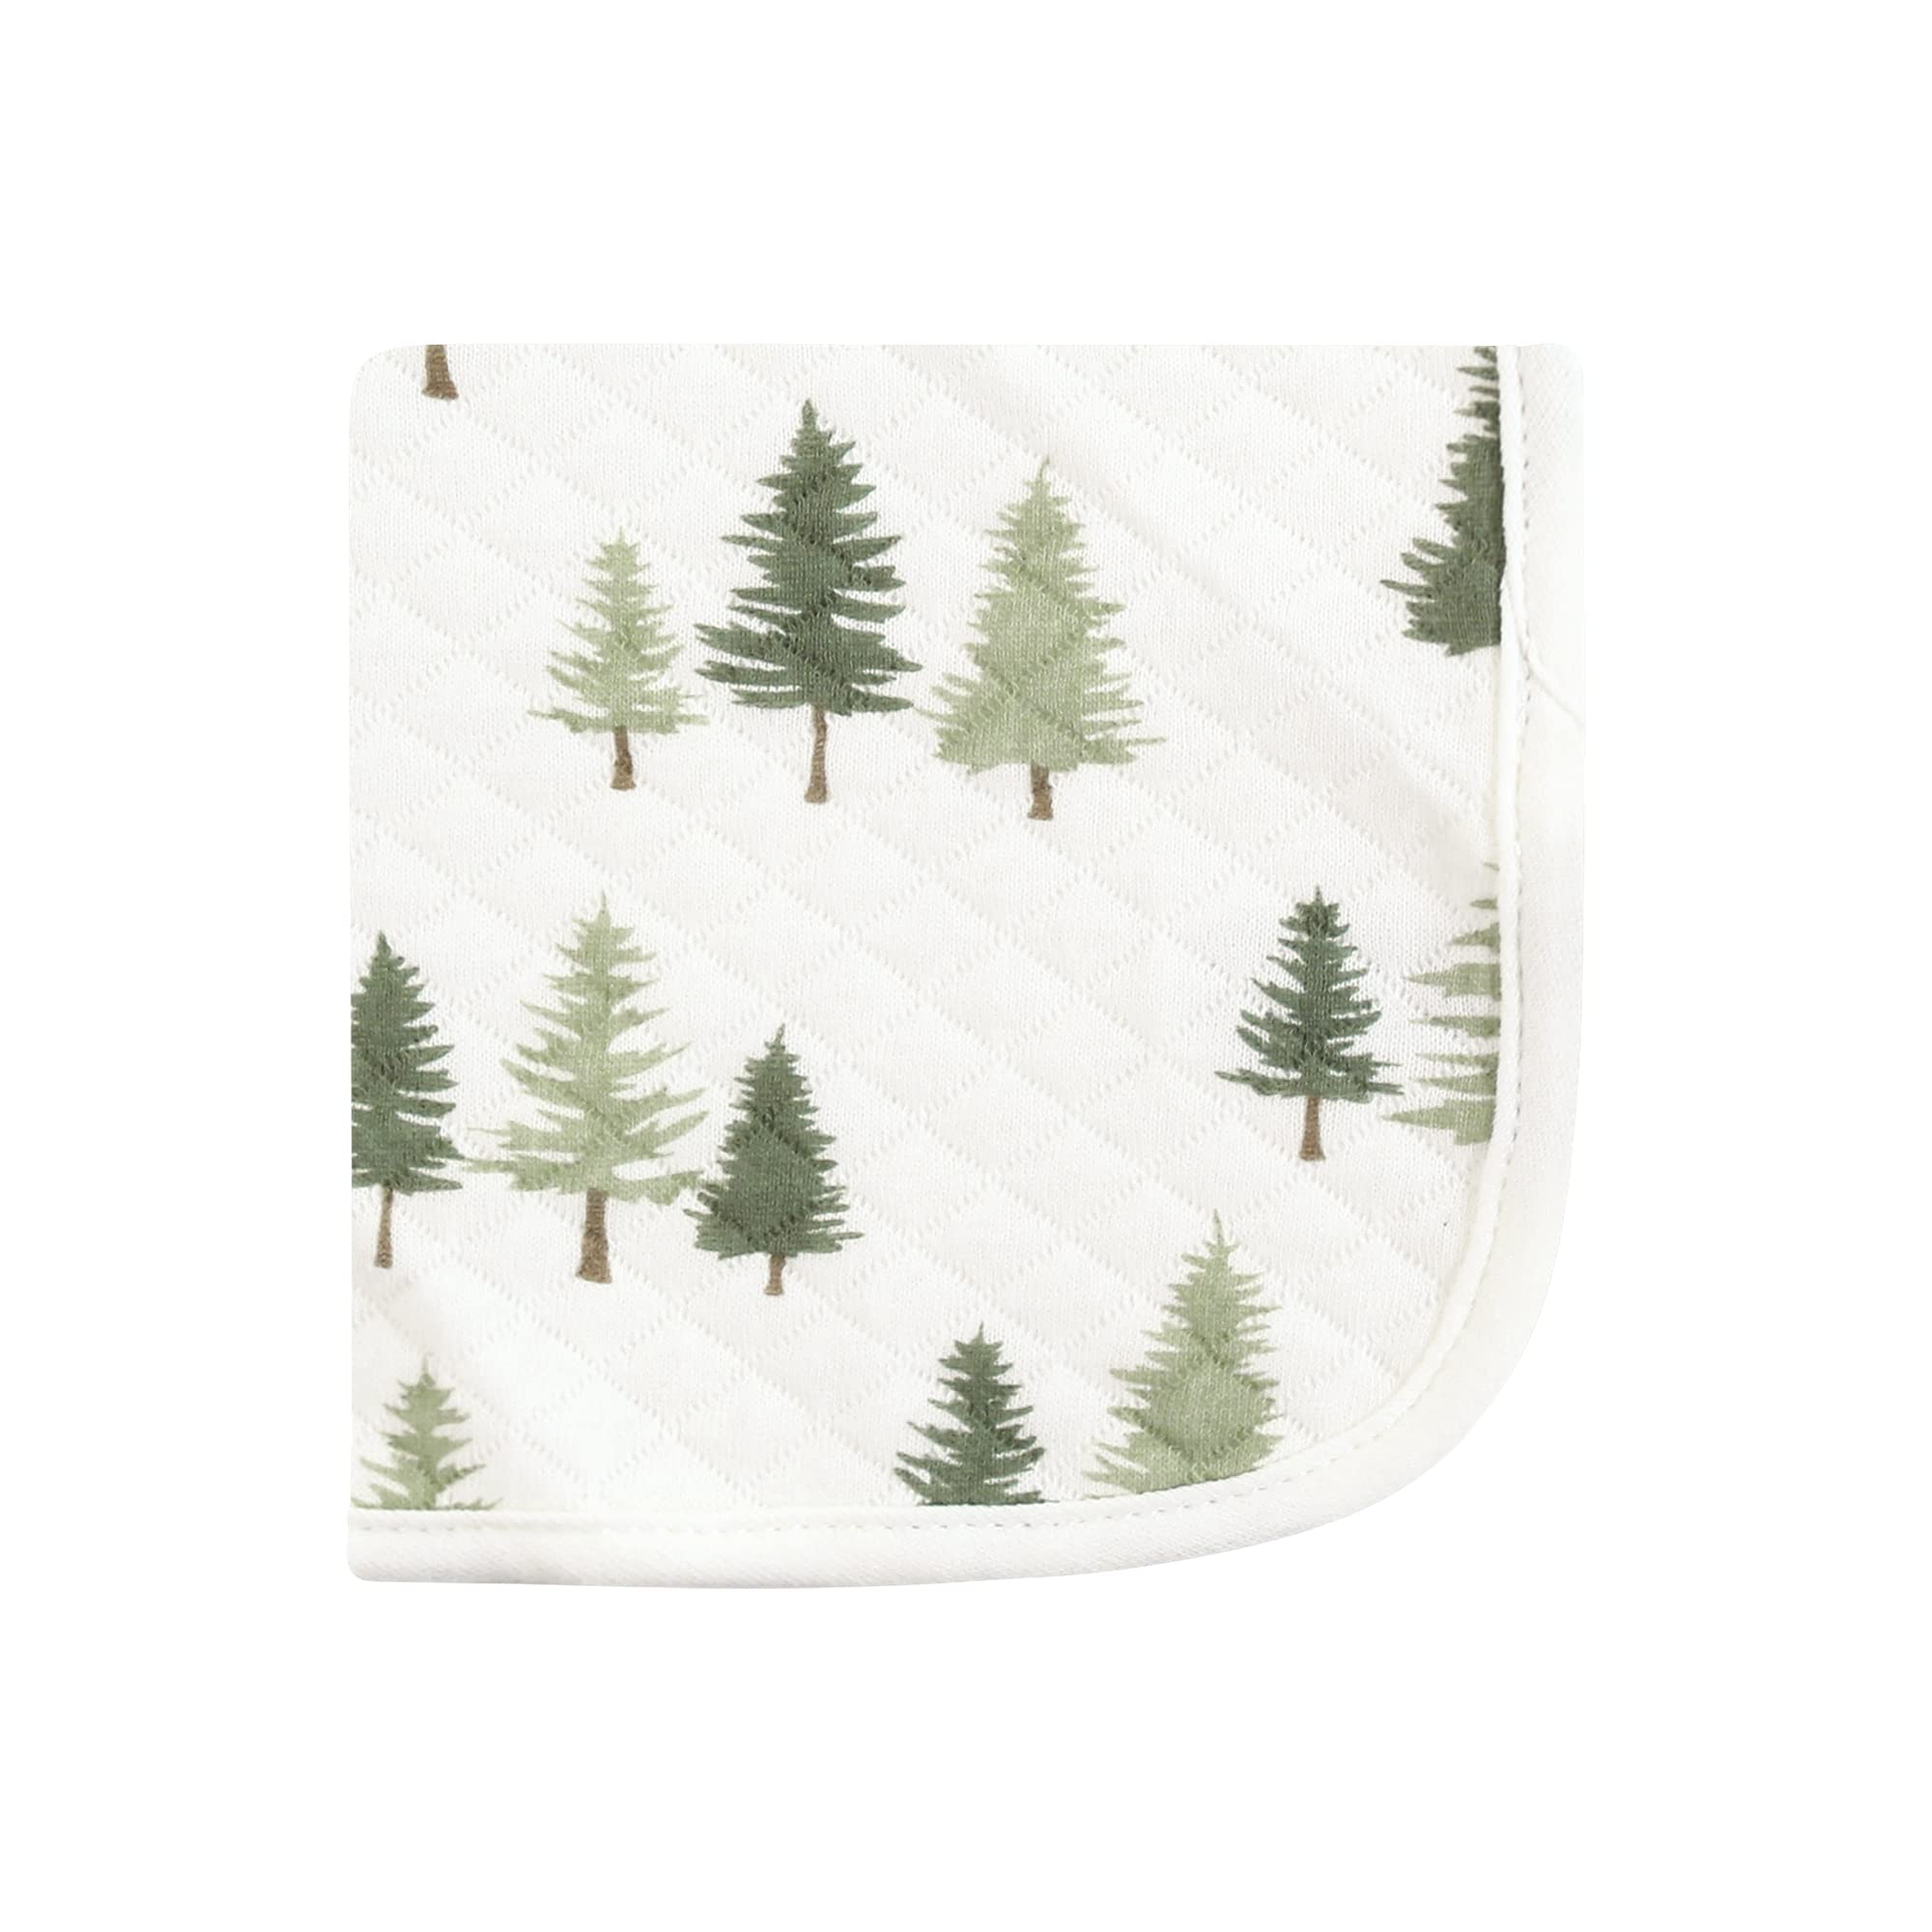 Hudson Baby Unisex Baby Quilted Cotton Washcloths, Forest Animals, One Size